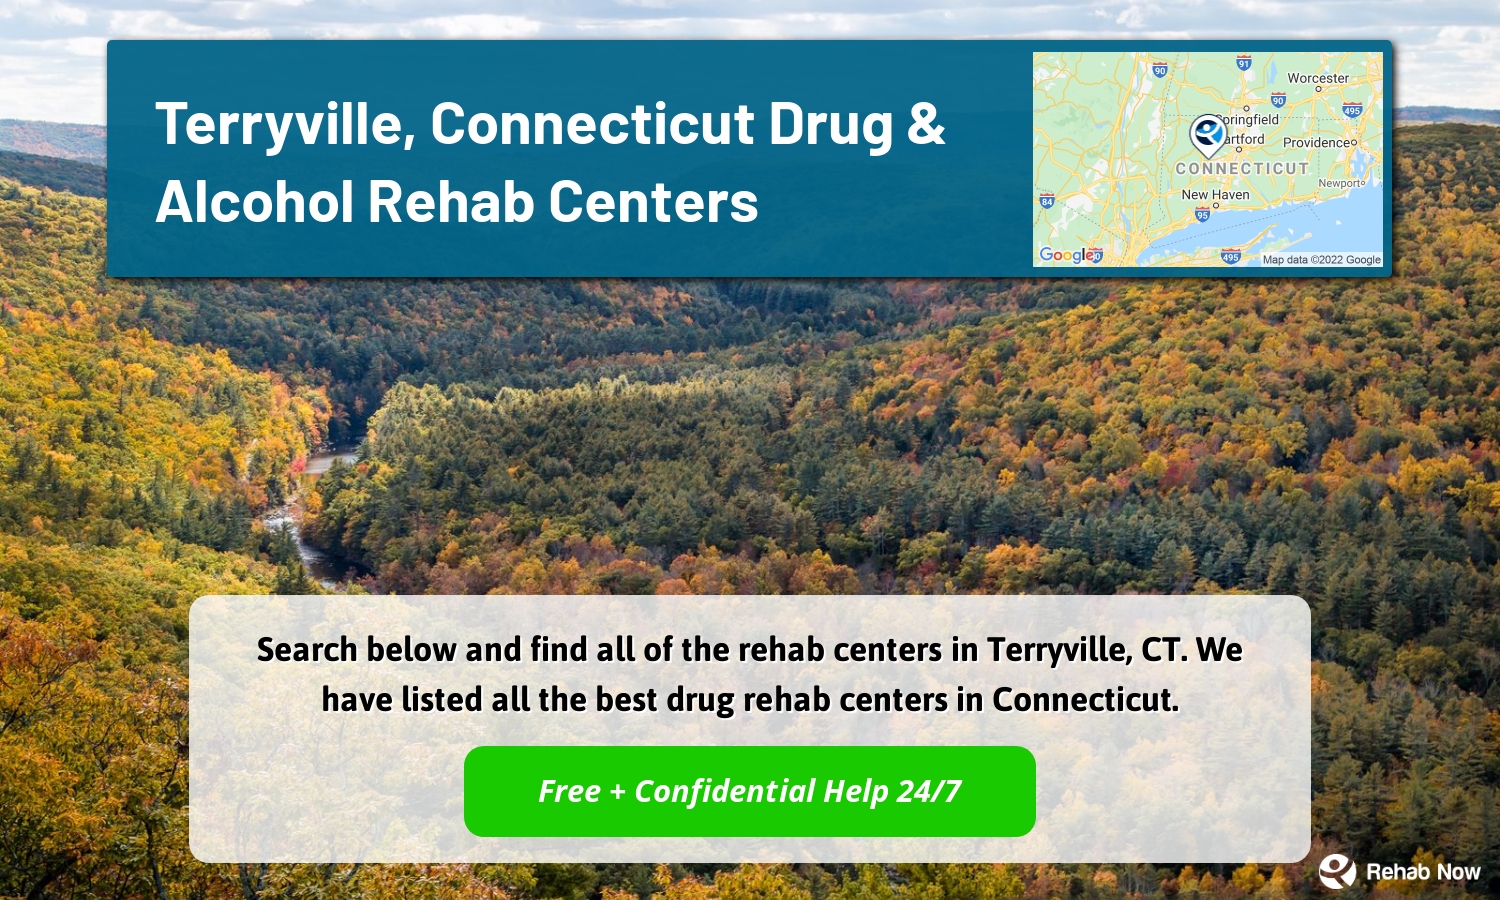 Search below and find all of the rehab centers in Terryville, CT. We have listed all the best drug rehab centers in Connecticut.